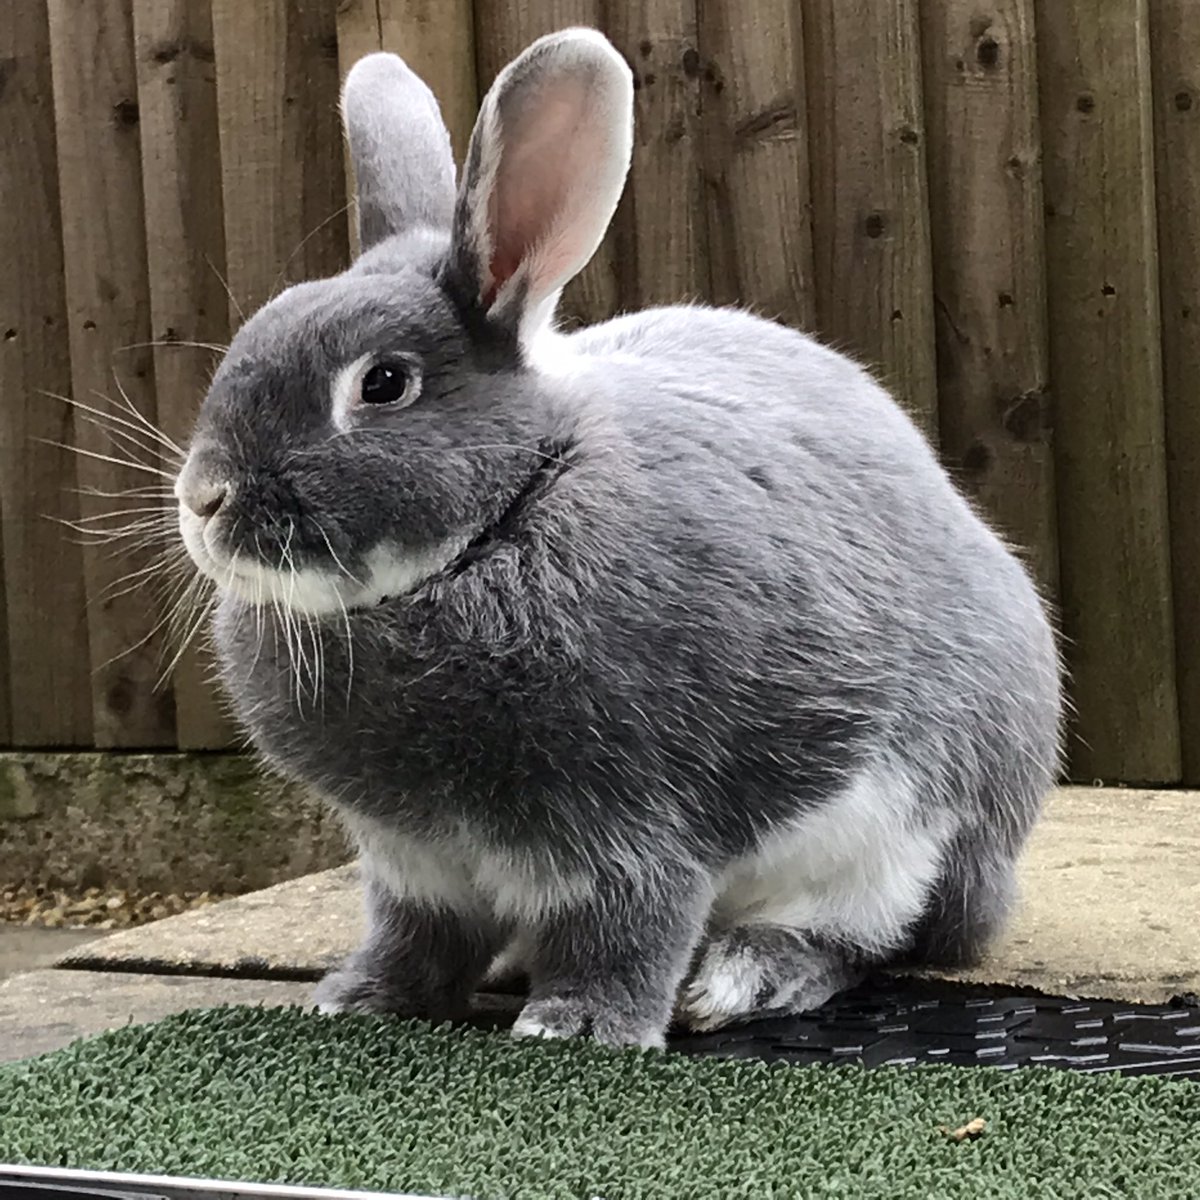 I’s posings for mys pikchure todays #rabbitsoftwitter #bunob #bunnies #rabbits #pets #handsome #cute